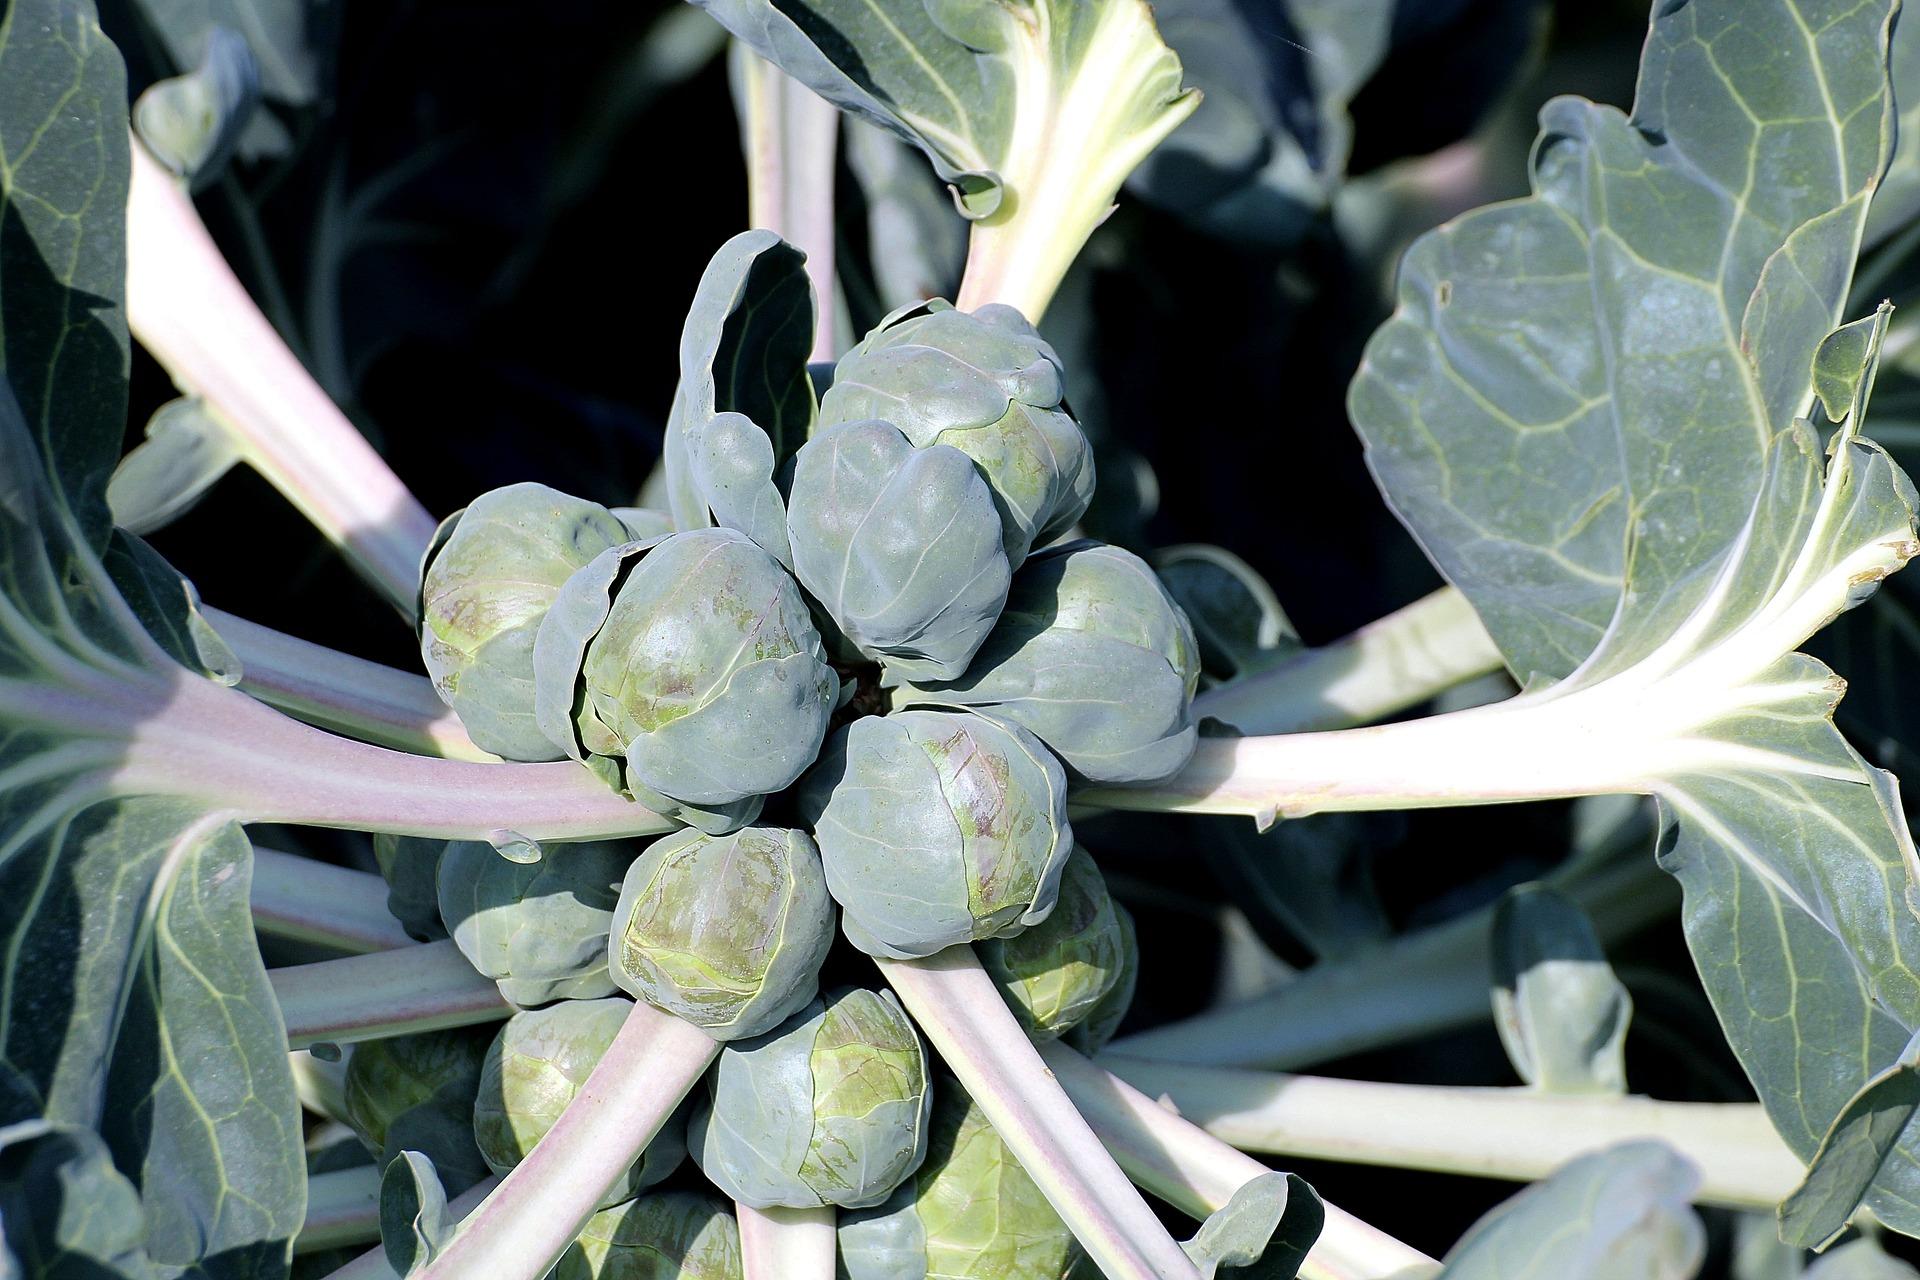 uploads/images/Brussels Sprouts 455967_1920